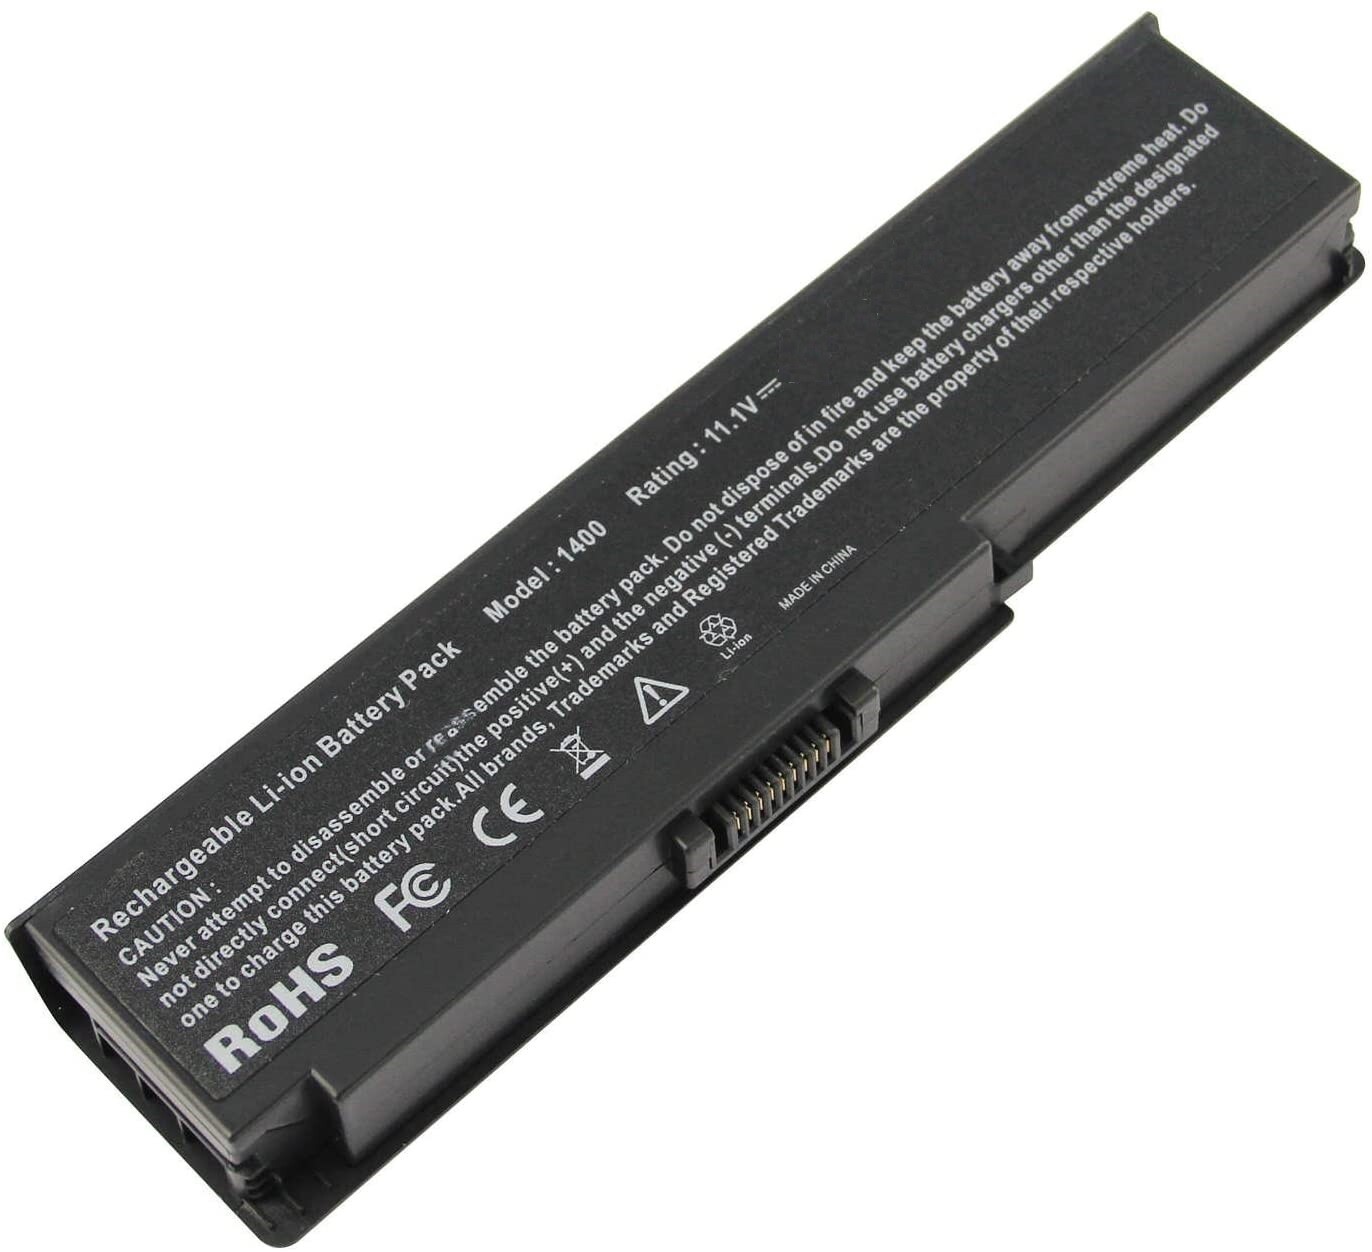 dell 312-0543, 312-0584, FT080, WW116, MN151, dell Inspiron 1420, Vostro 1400 laptop battery